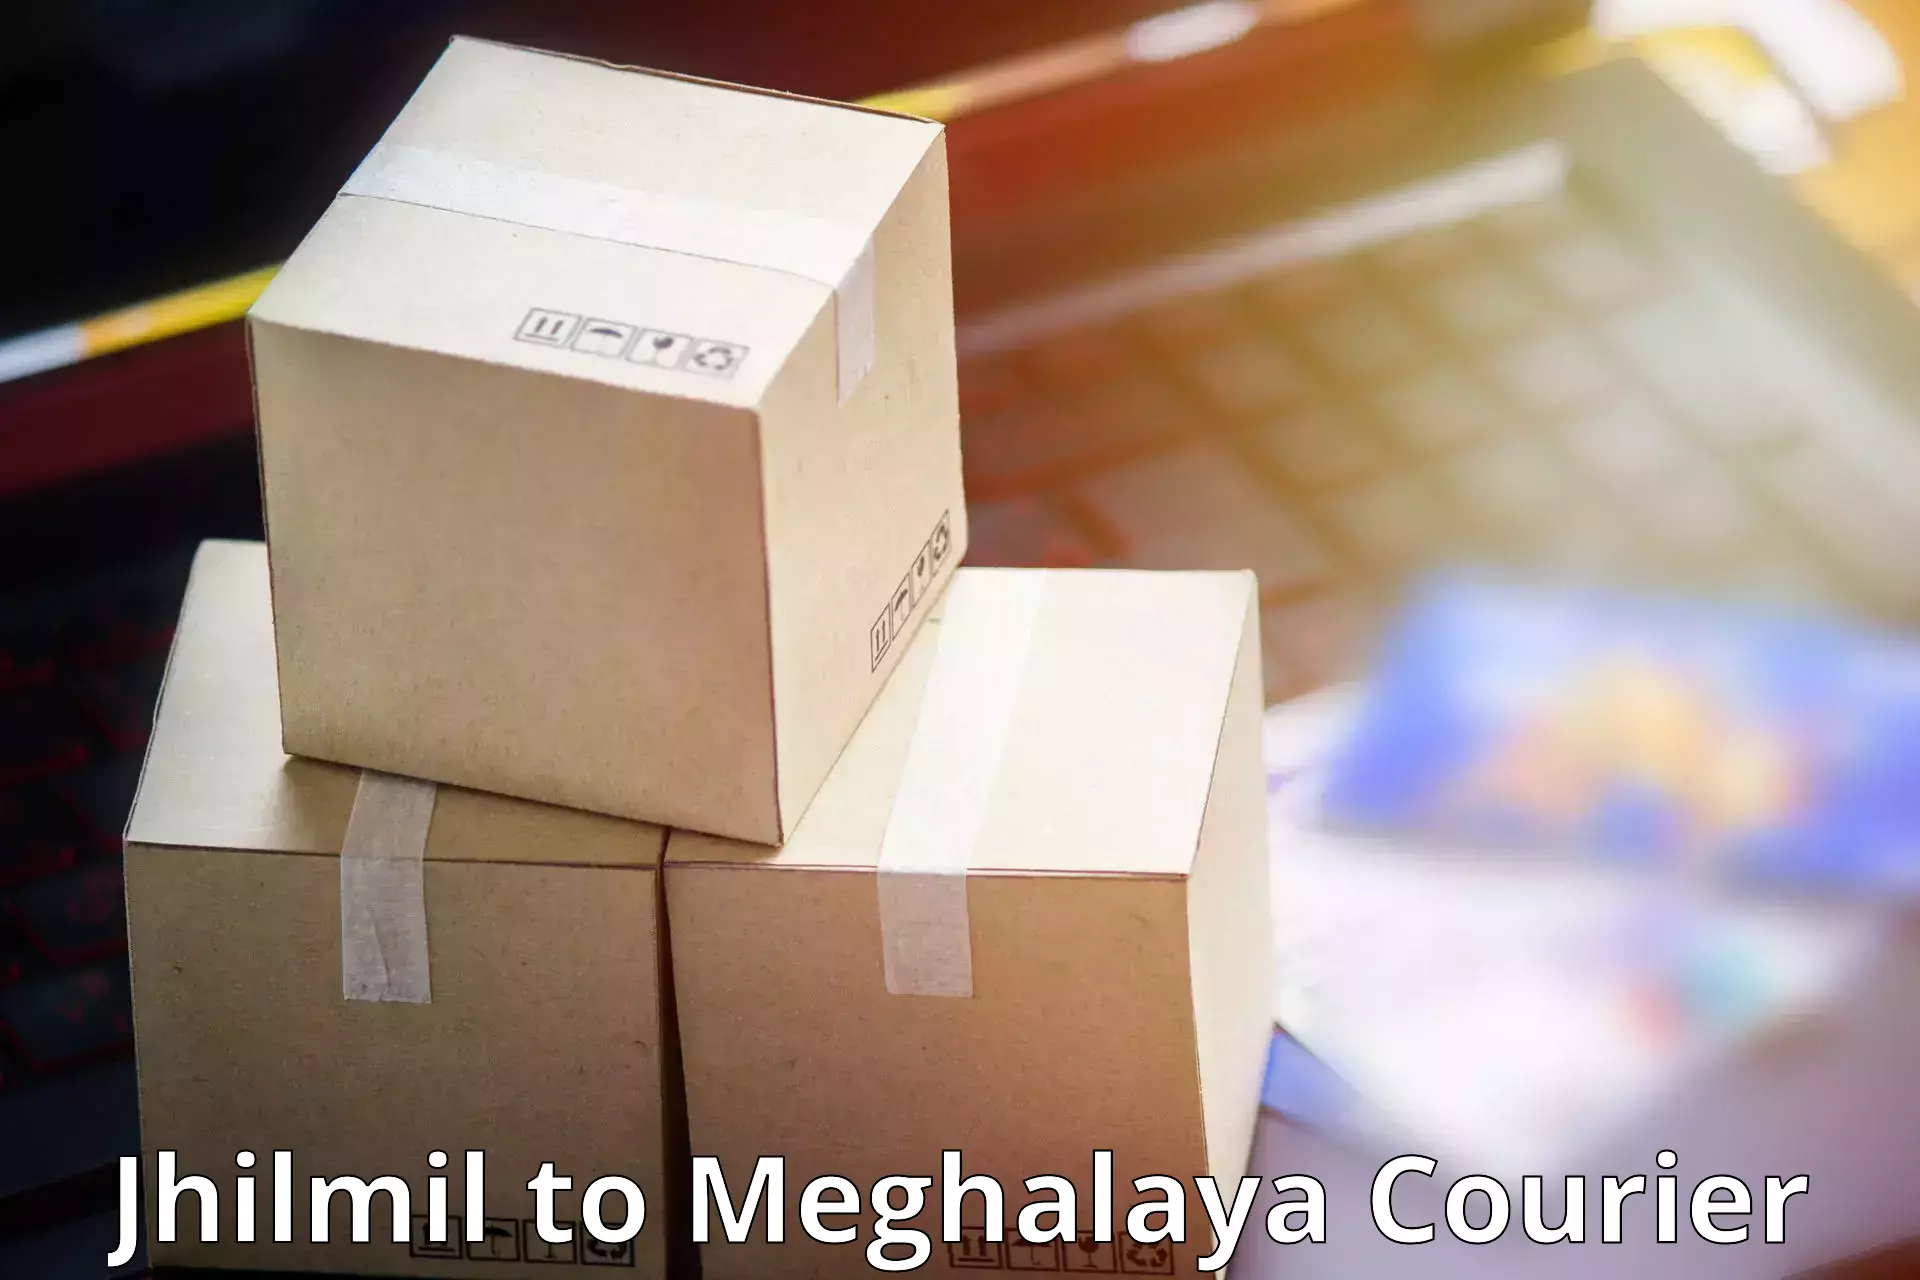 Special handling courier Jhilmil to Dkhiah West